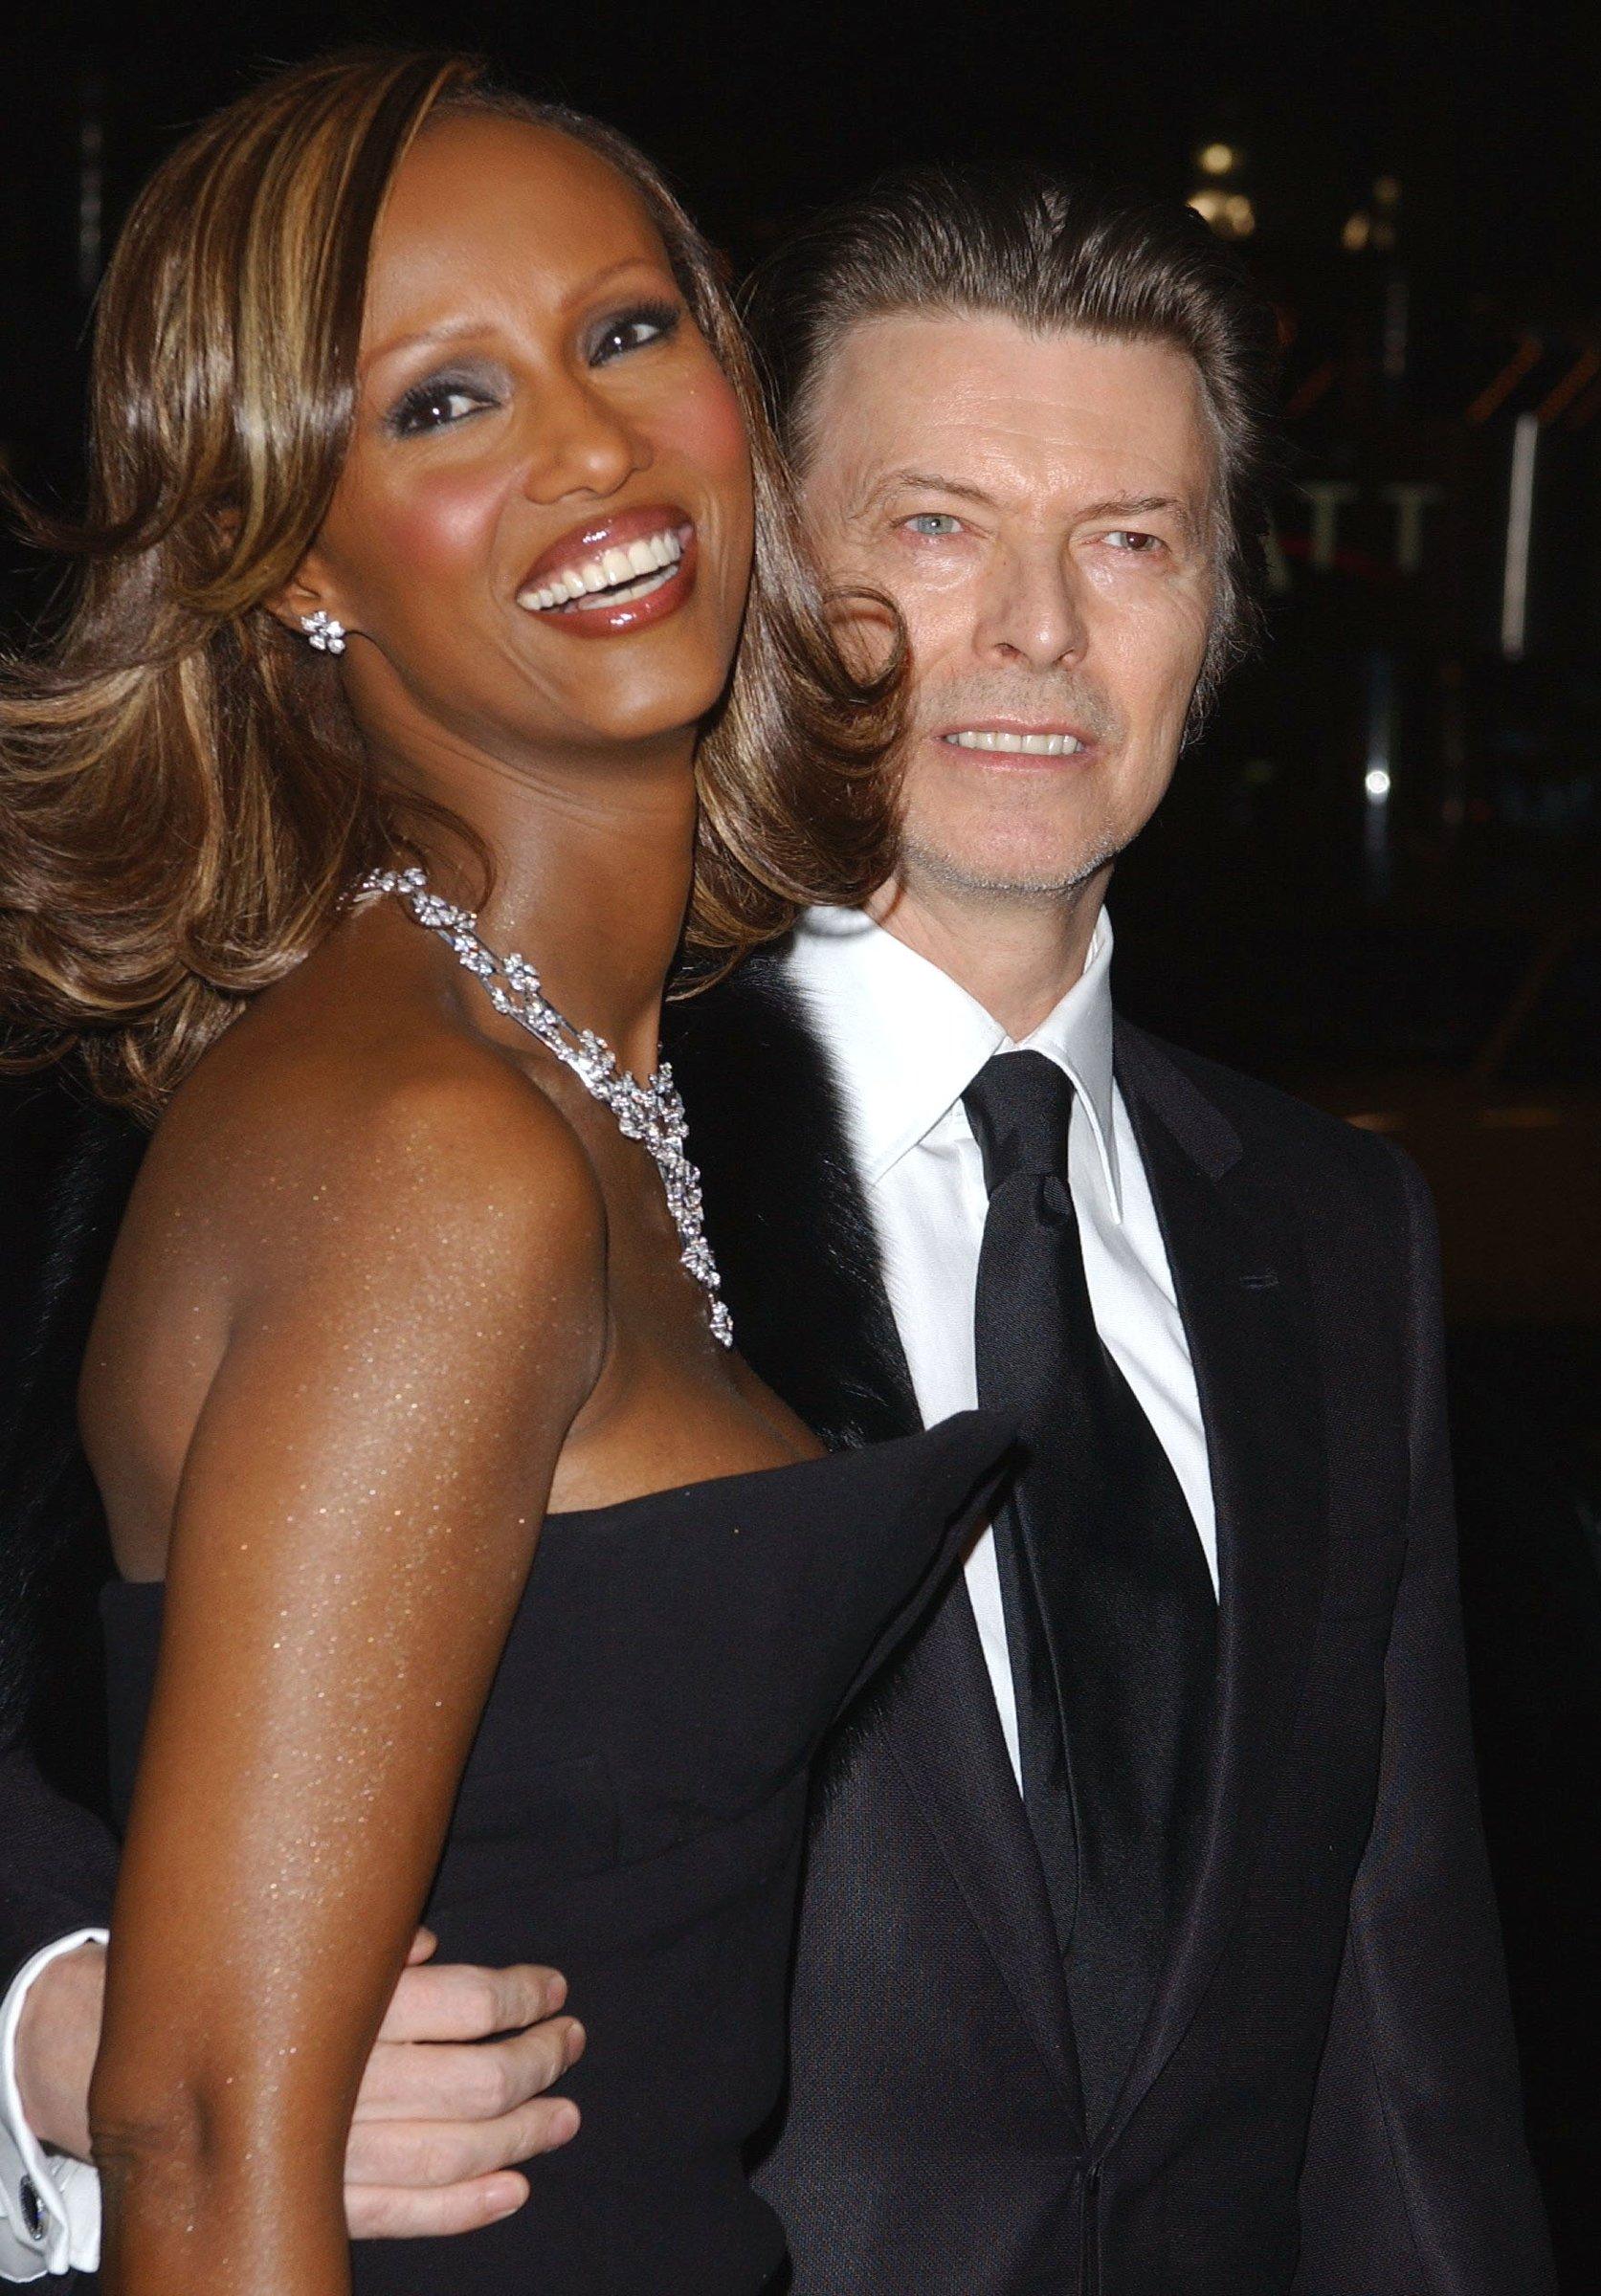 Singer David Bowie and his wife Iman arrrive at Cipriani's 42nd Street to attend the amfAR's New York annual benefit gala, Monday February 3, 2003.